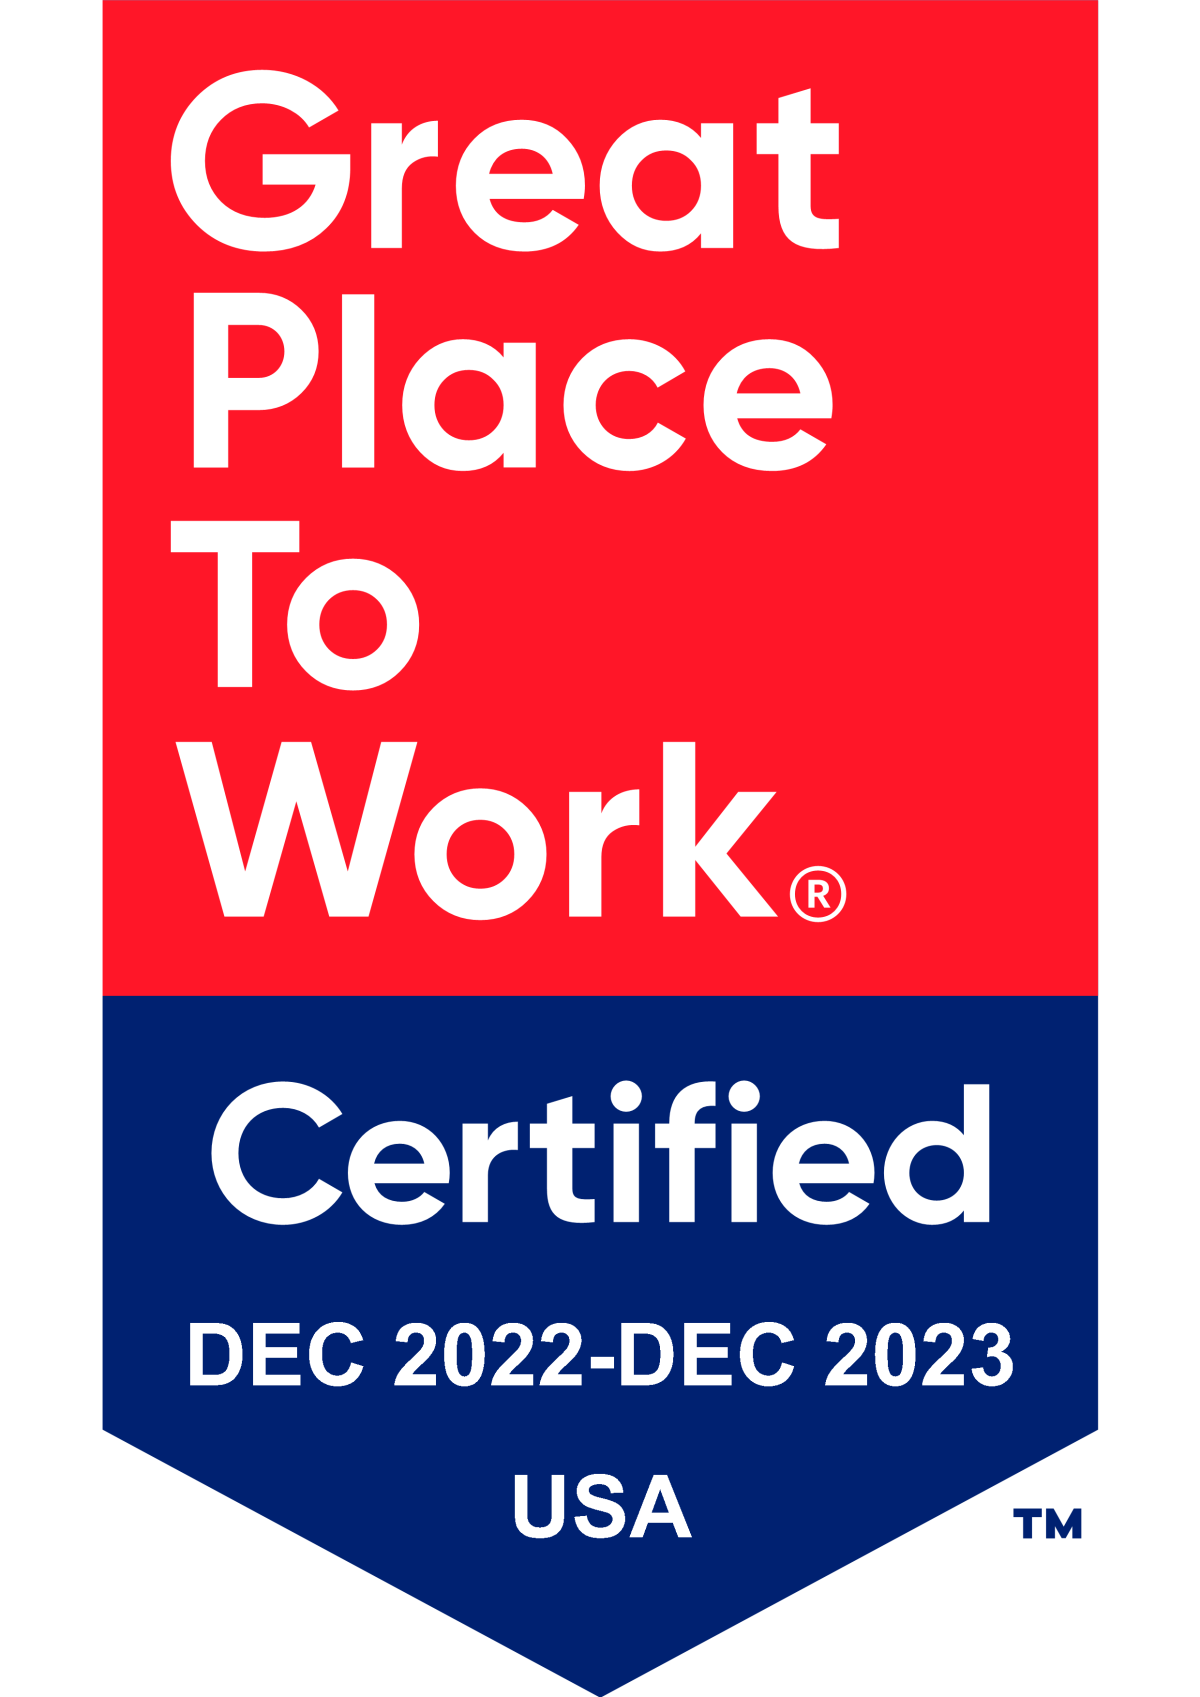 Ribbon stating Great Place to Work®. Certified December 2022 to December 2023